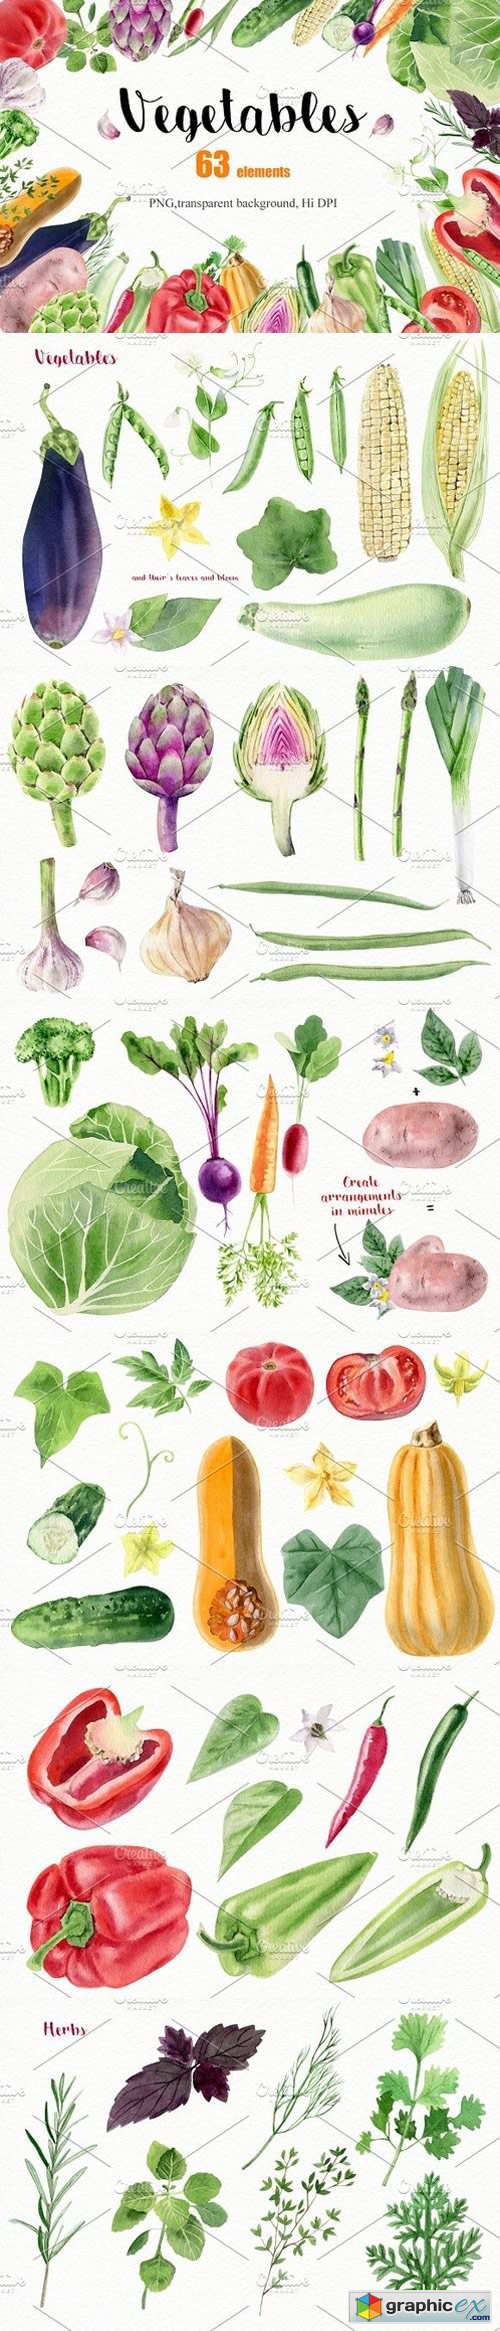 Watercolor vegetables and herbs